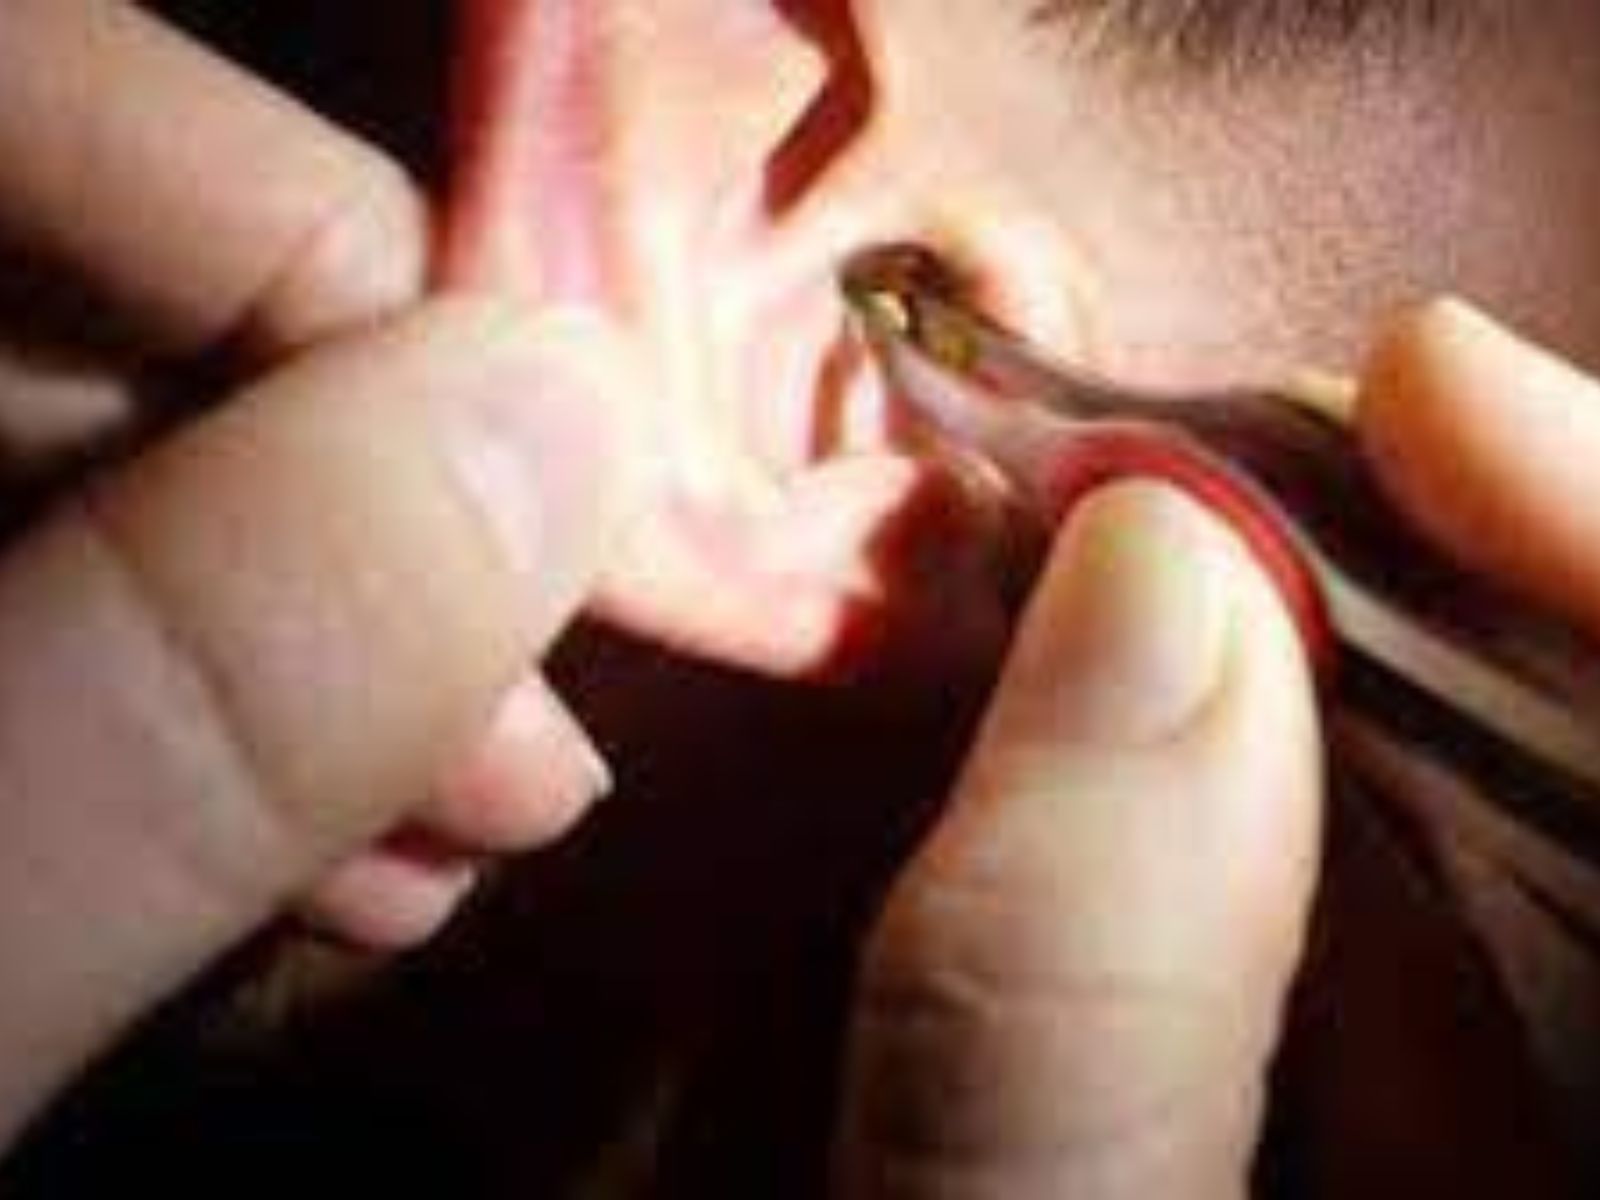 Manual Ear Wax removal for patient from Arnold